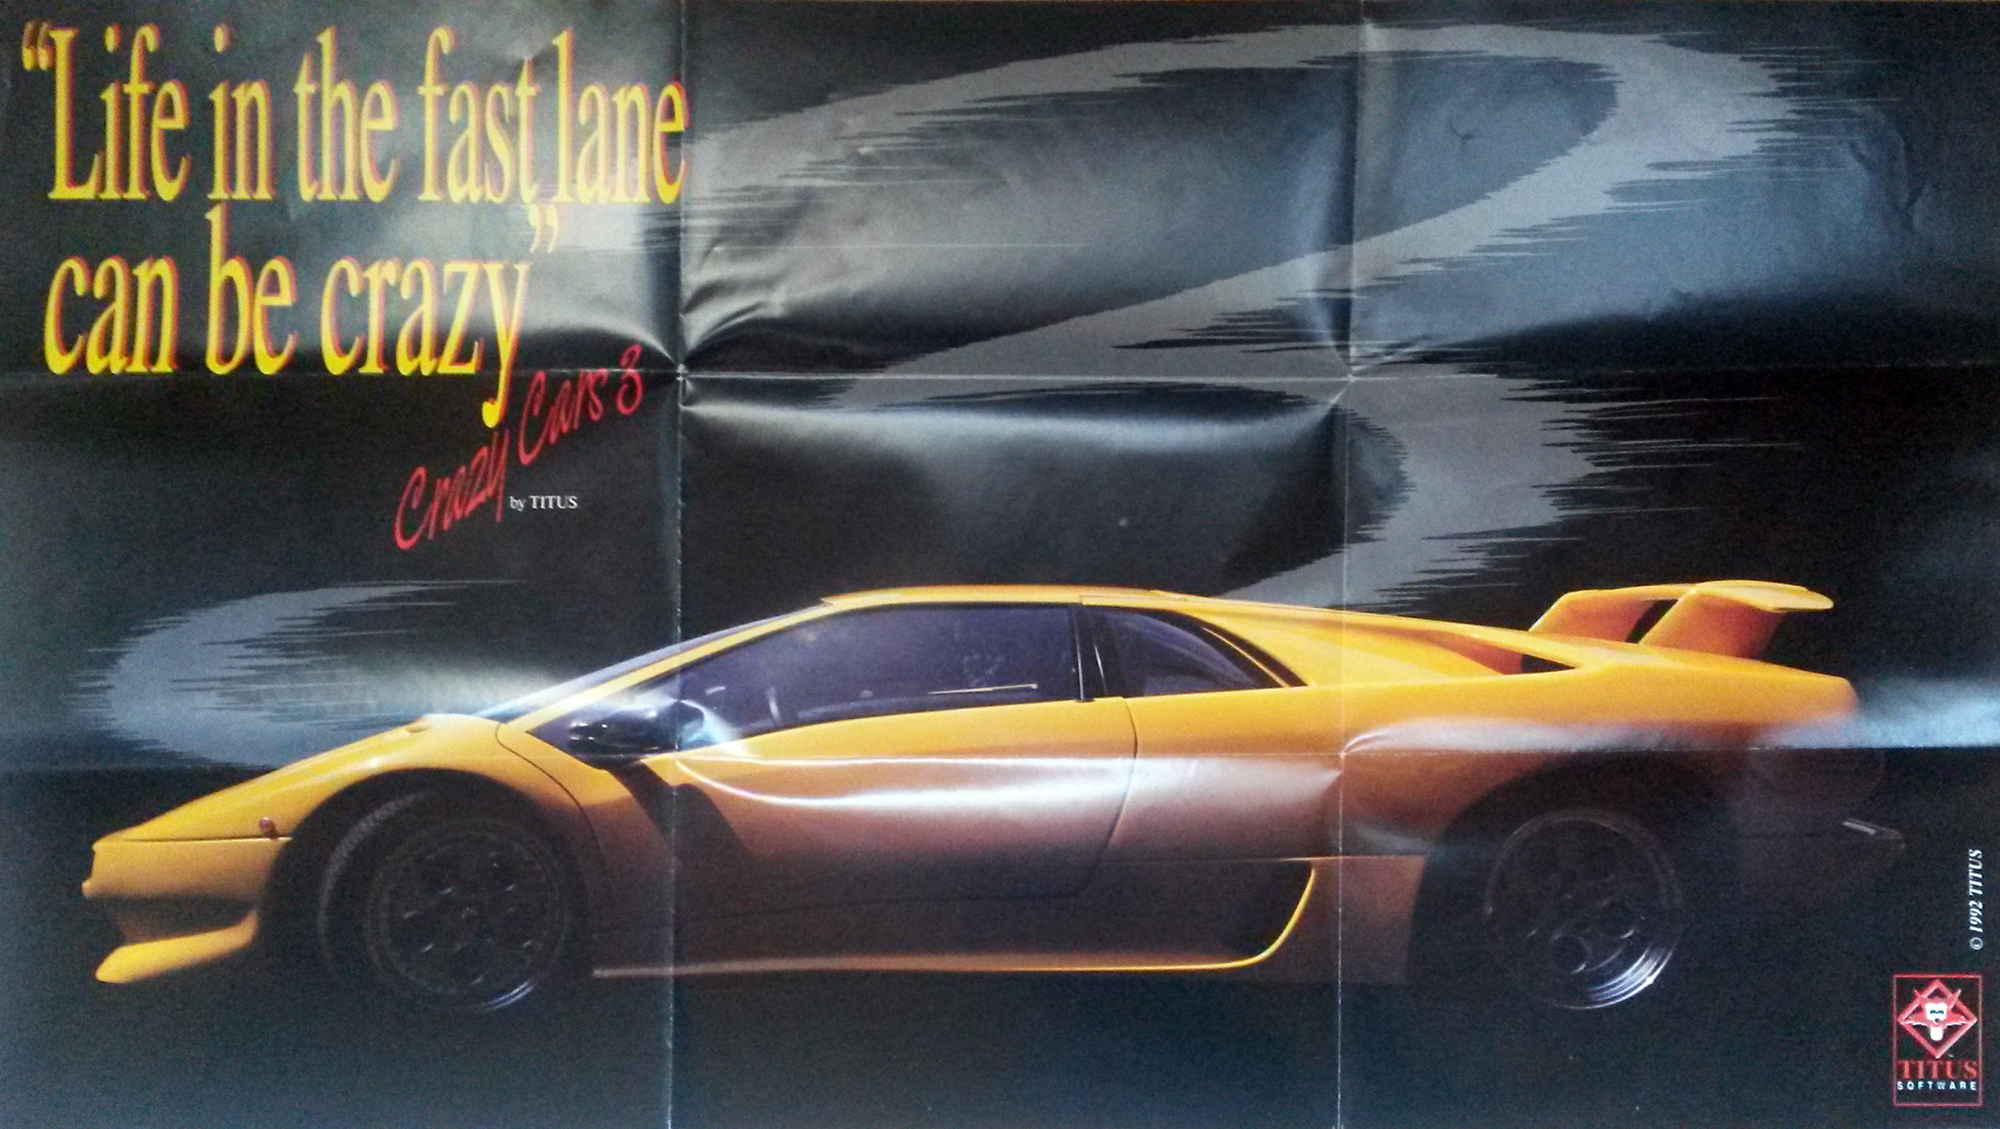 Crazy Cars 3 came with a beautiful poster of the star of the show, the Lamborghini Diablo.